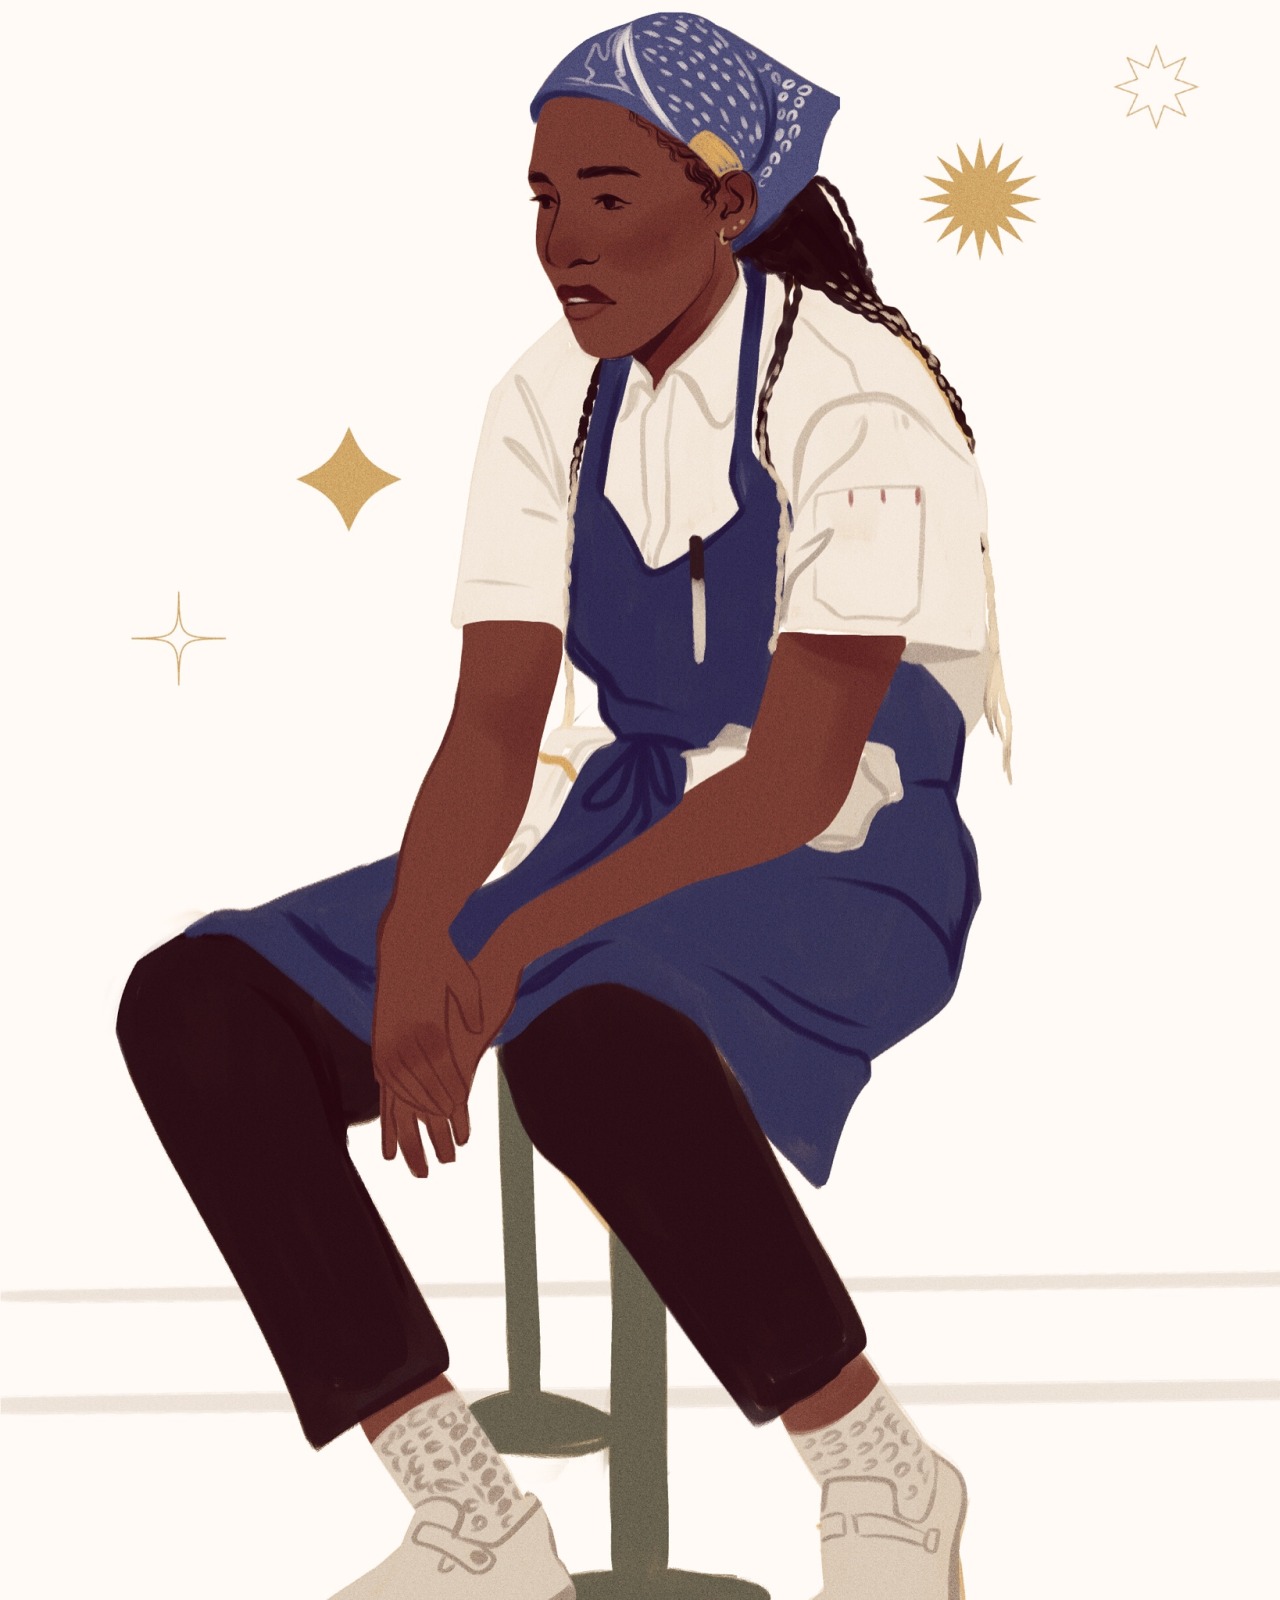 Fanart drawing of Sydney from The Bear, dressed in her chef's outfit with blue apron and bandana, seated on a chair